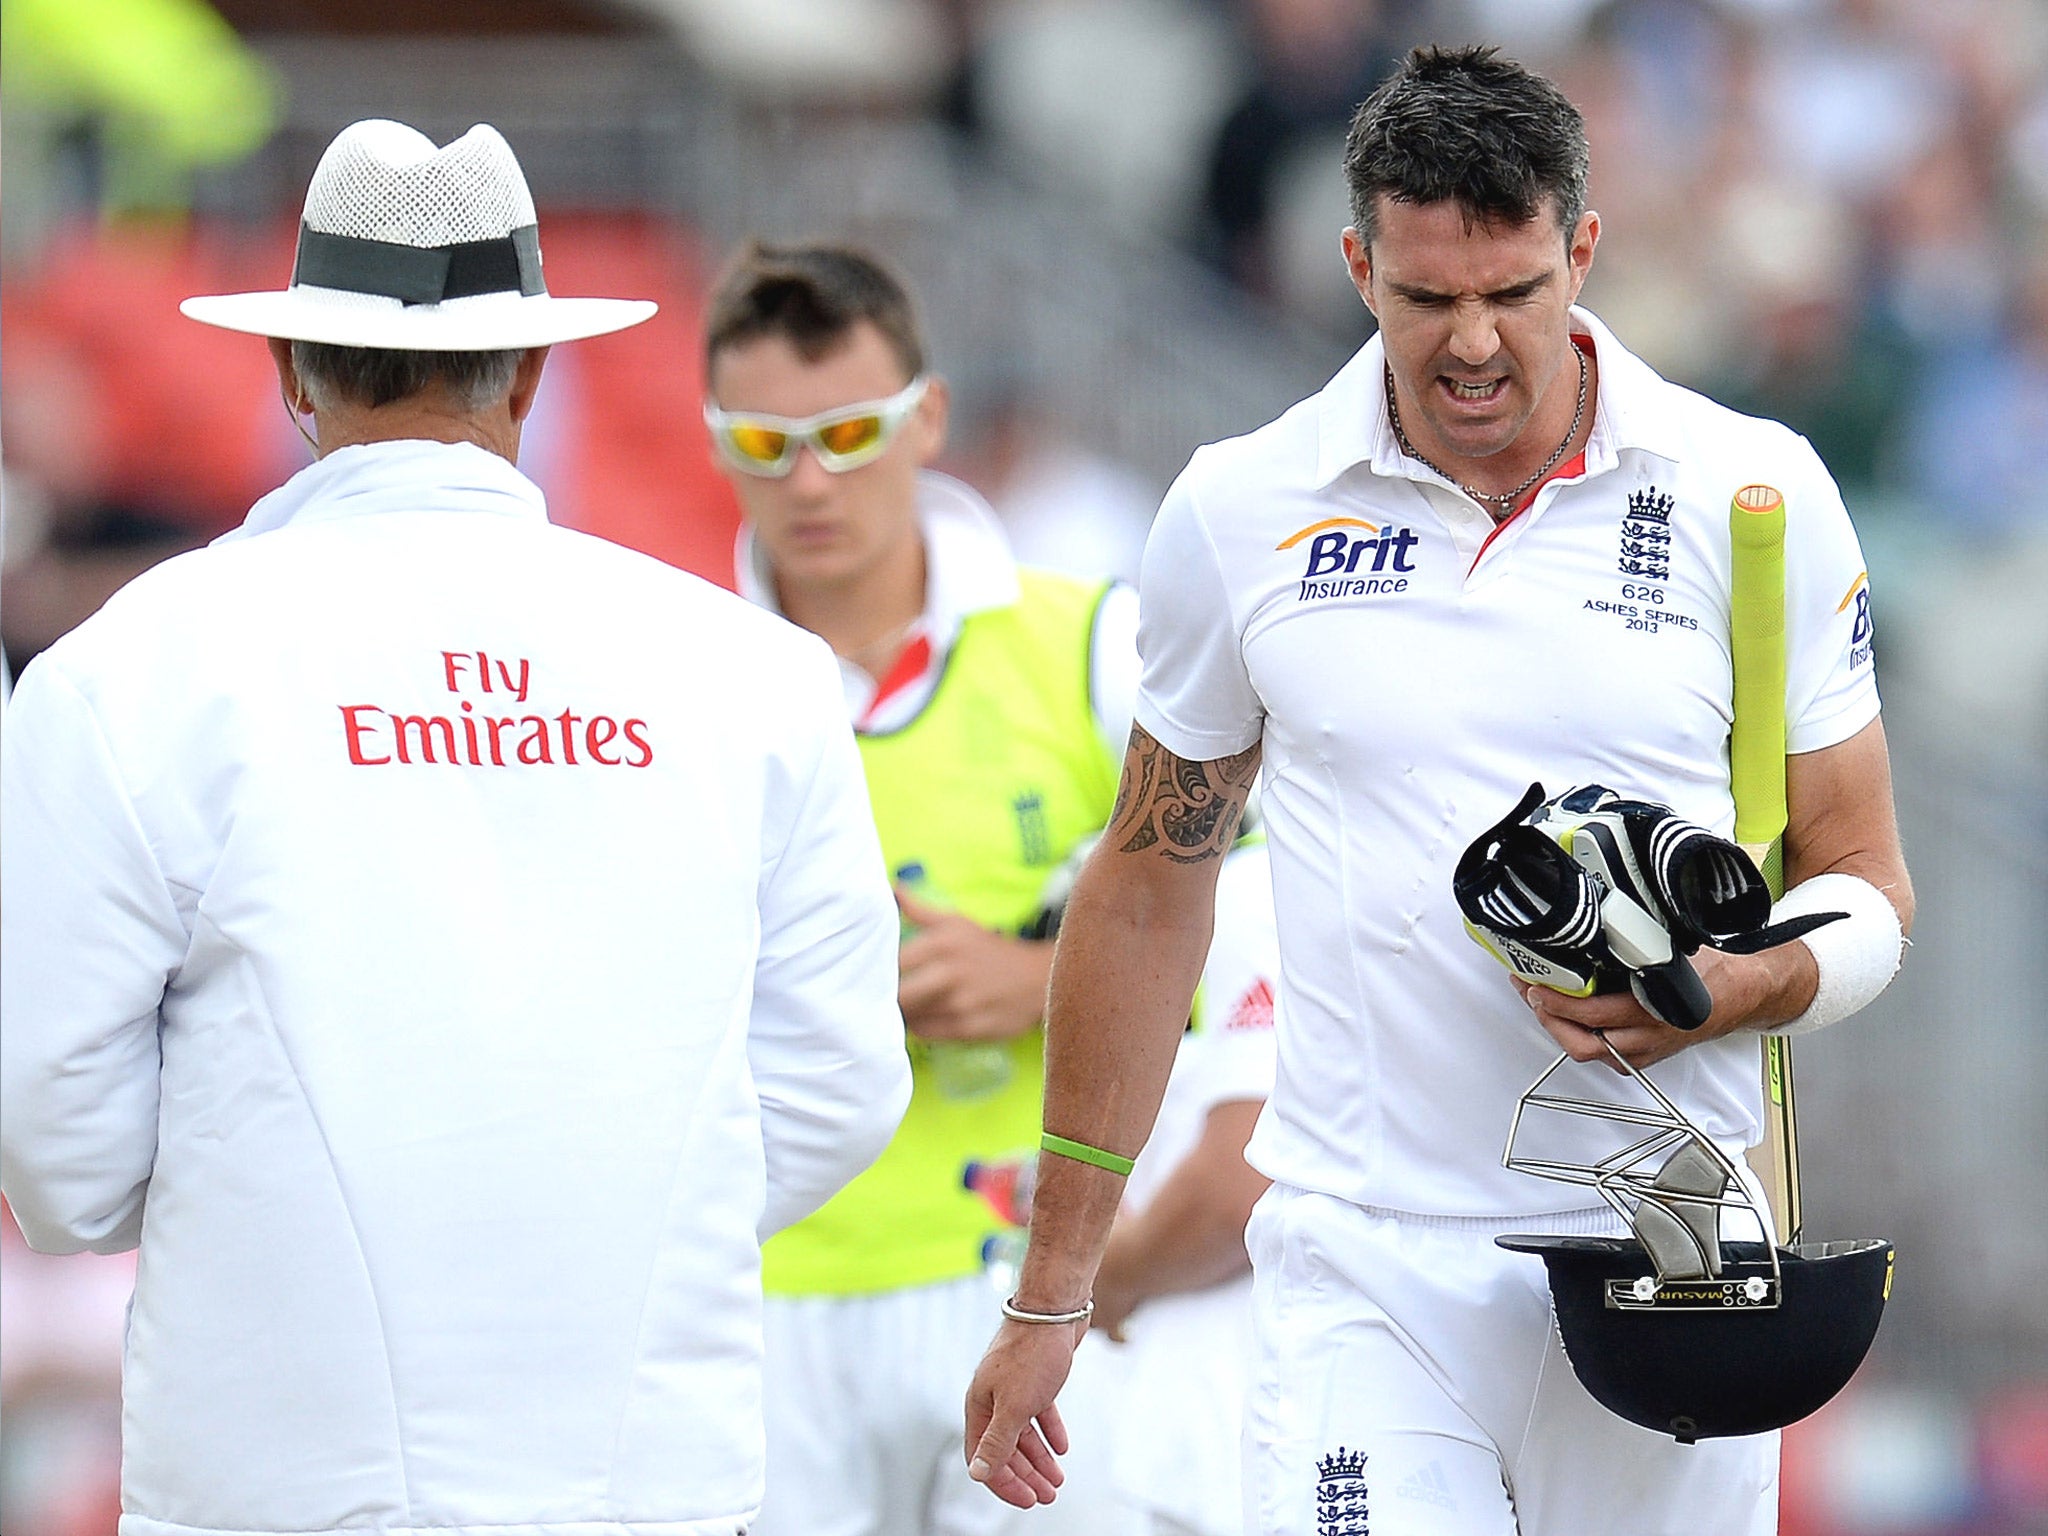 Kevin Pietersen shows his anger after the review decision at Old Trafford